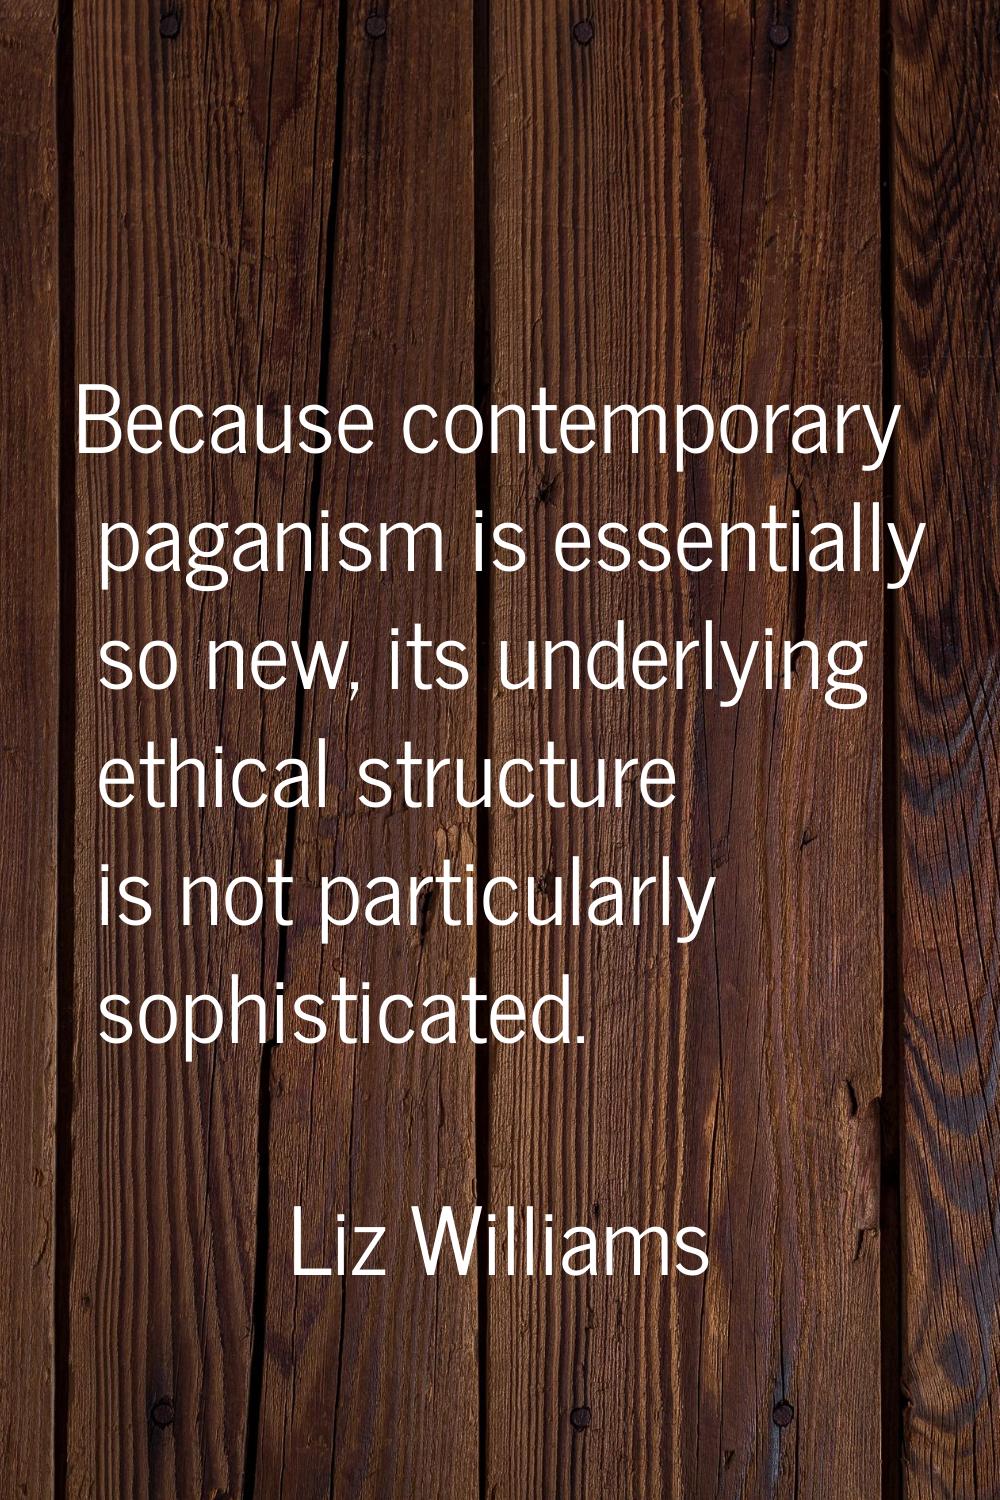 Because contemporary paganism is essentially so new, its underlying ethical structure is not partic